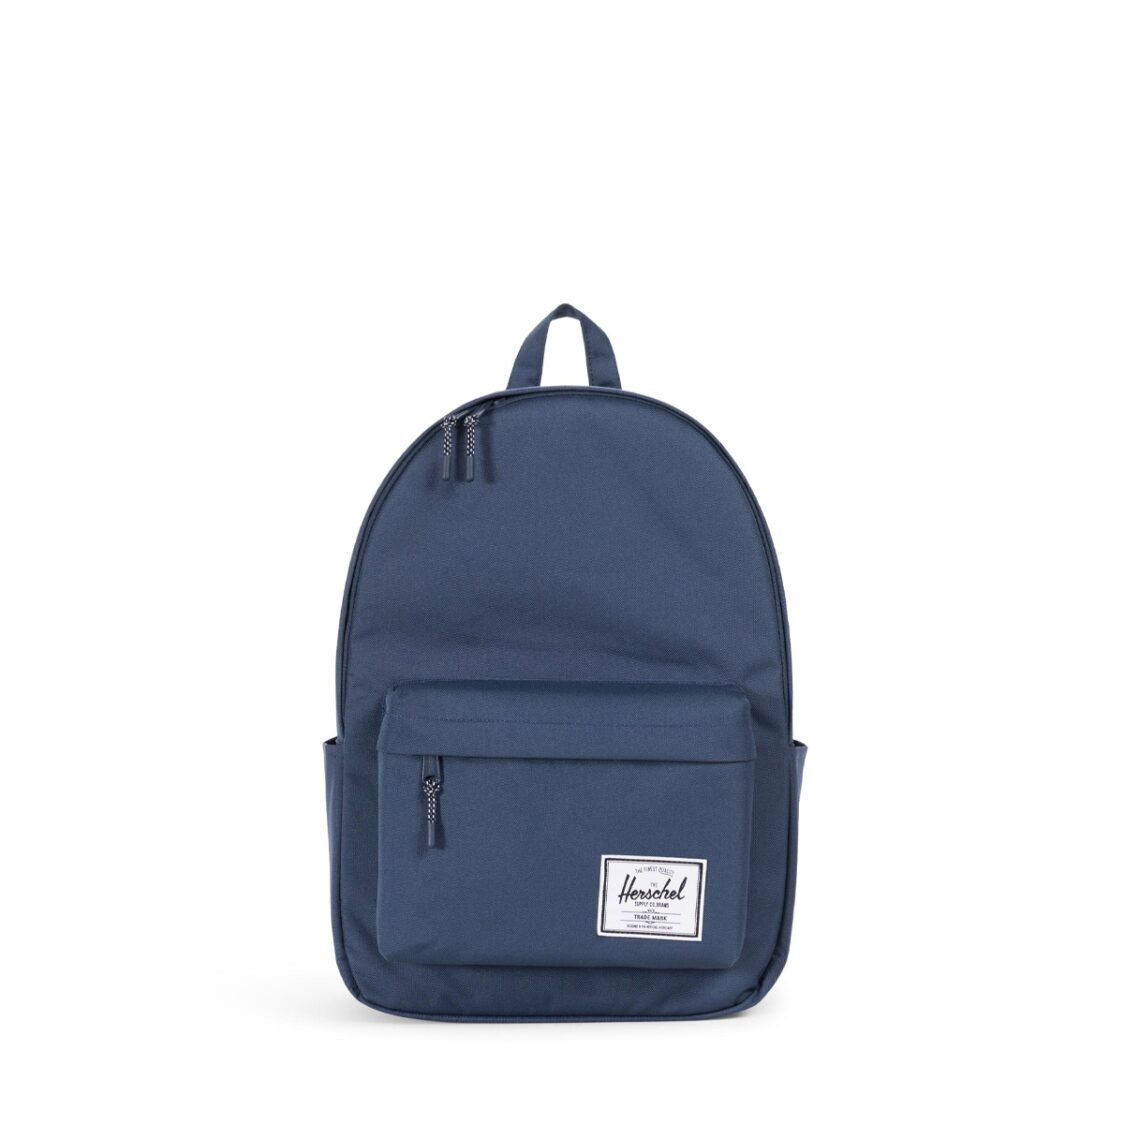 Herschel Classic X-Large Navy Backpack 10492-00007-OS